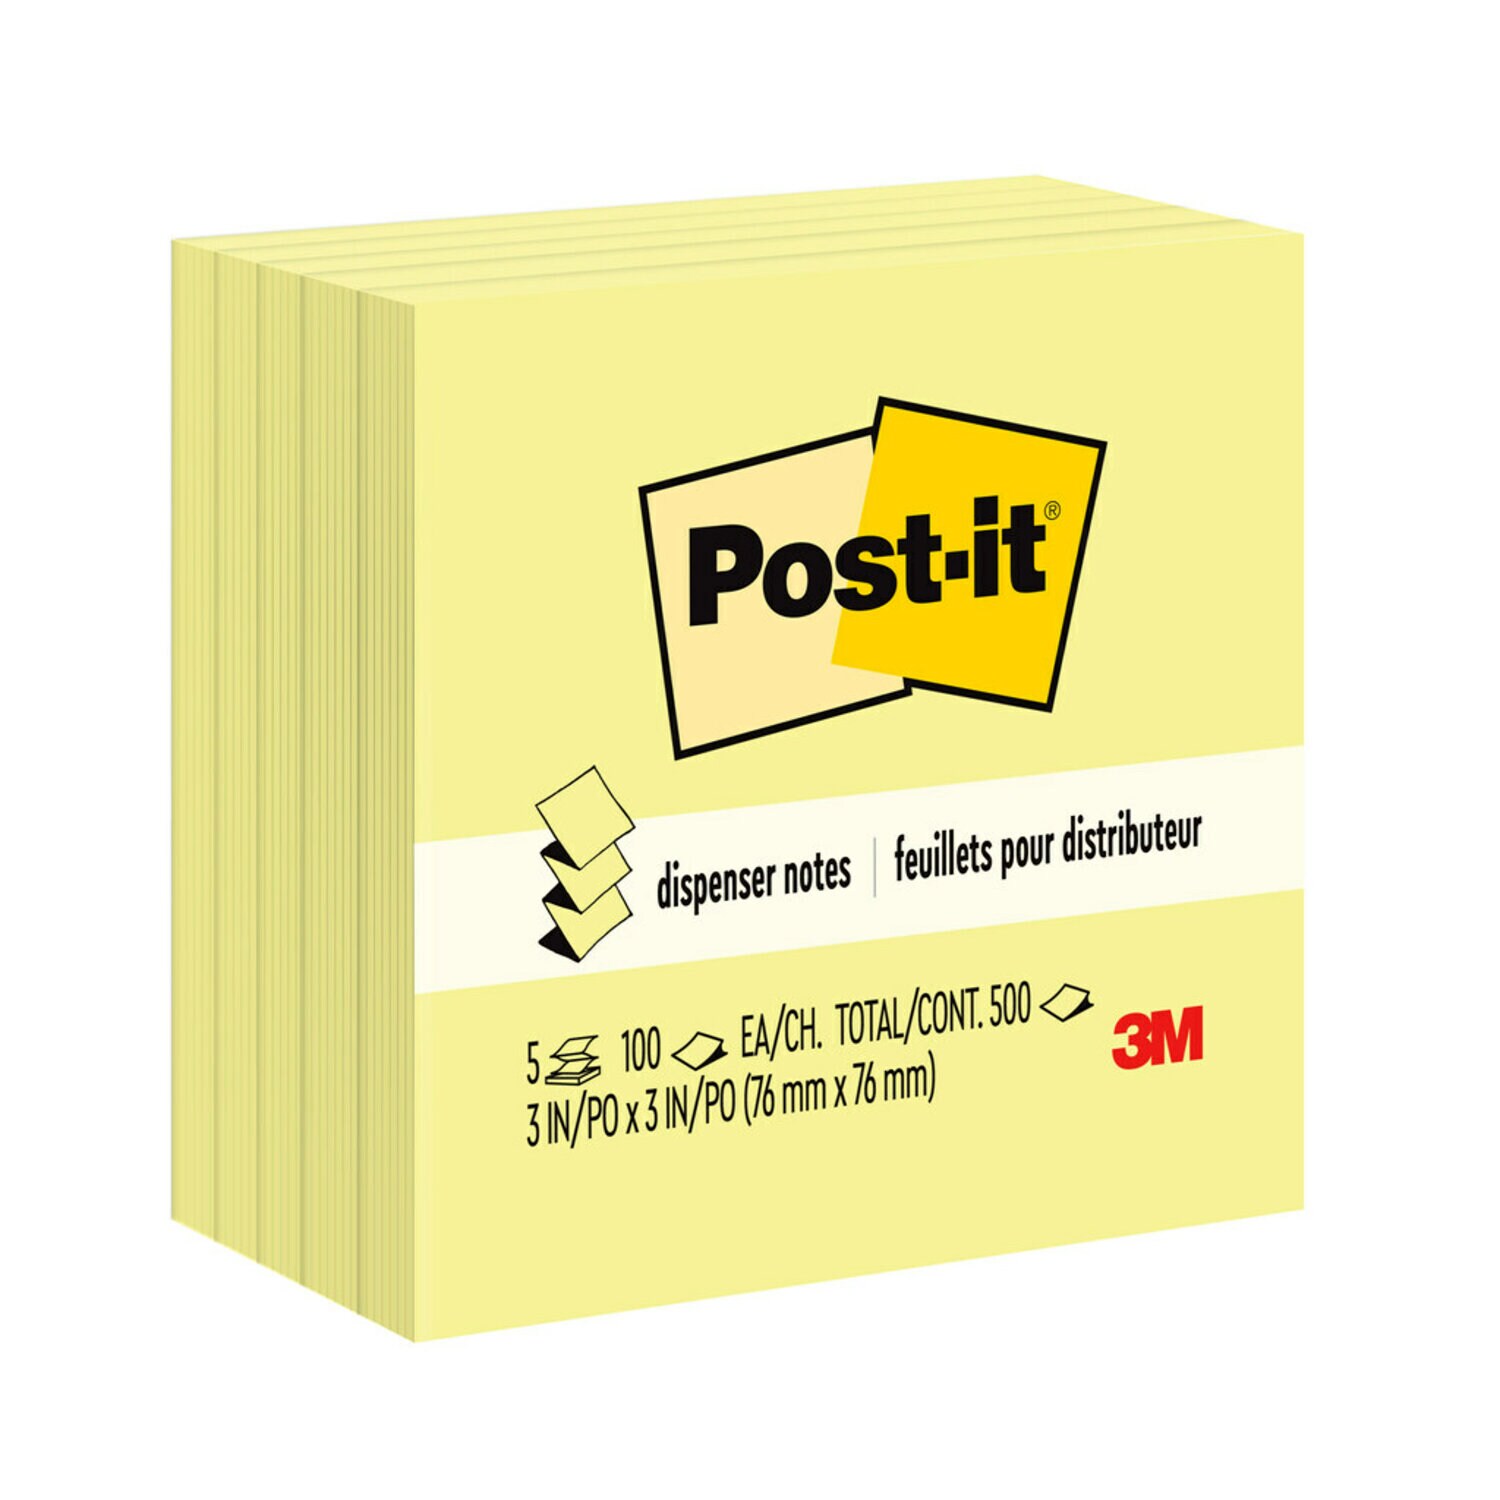 7100200345 - Post-it Dispenser Pop-up Notes 3301-5YW, 3 in x 3 in (76 mm x 76 mm)